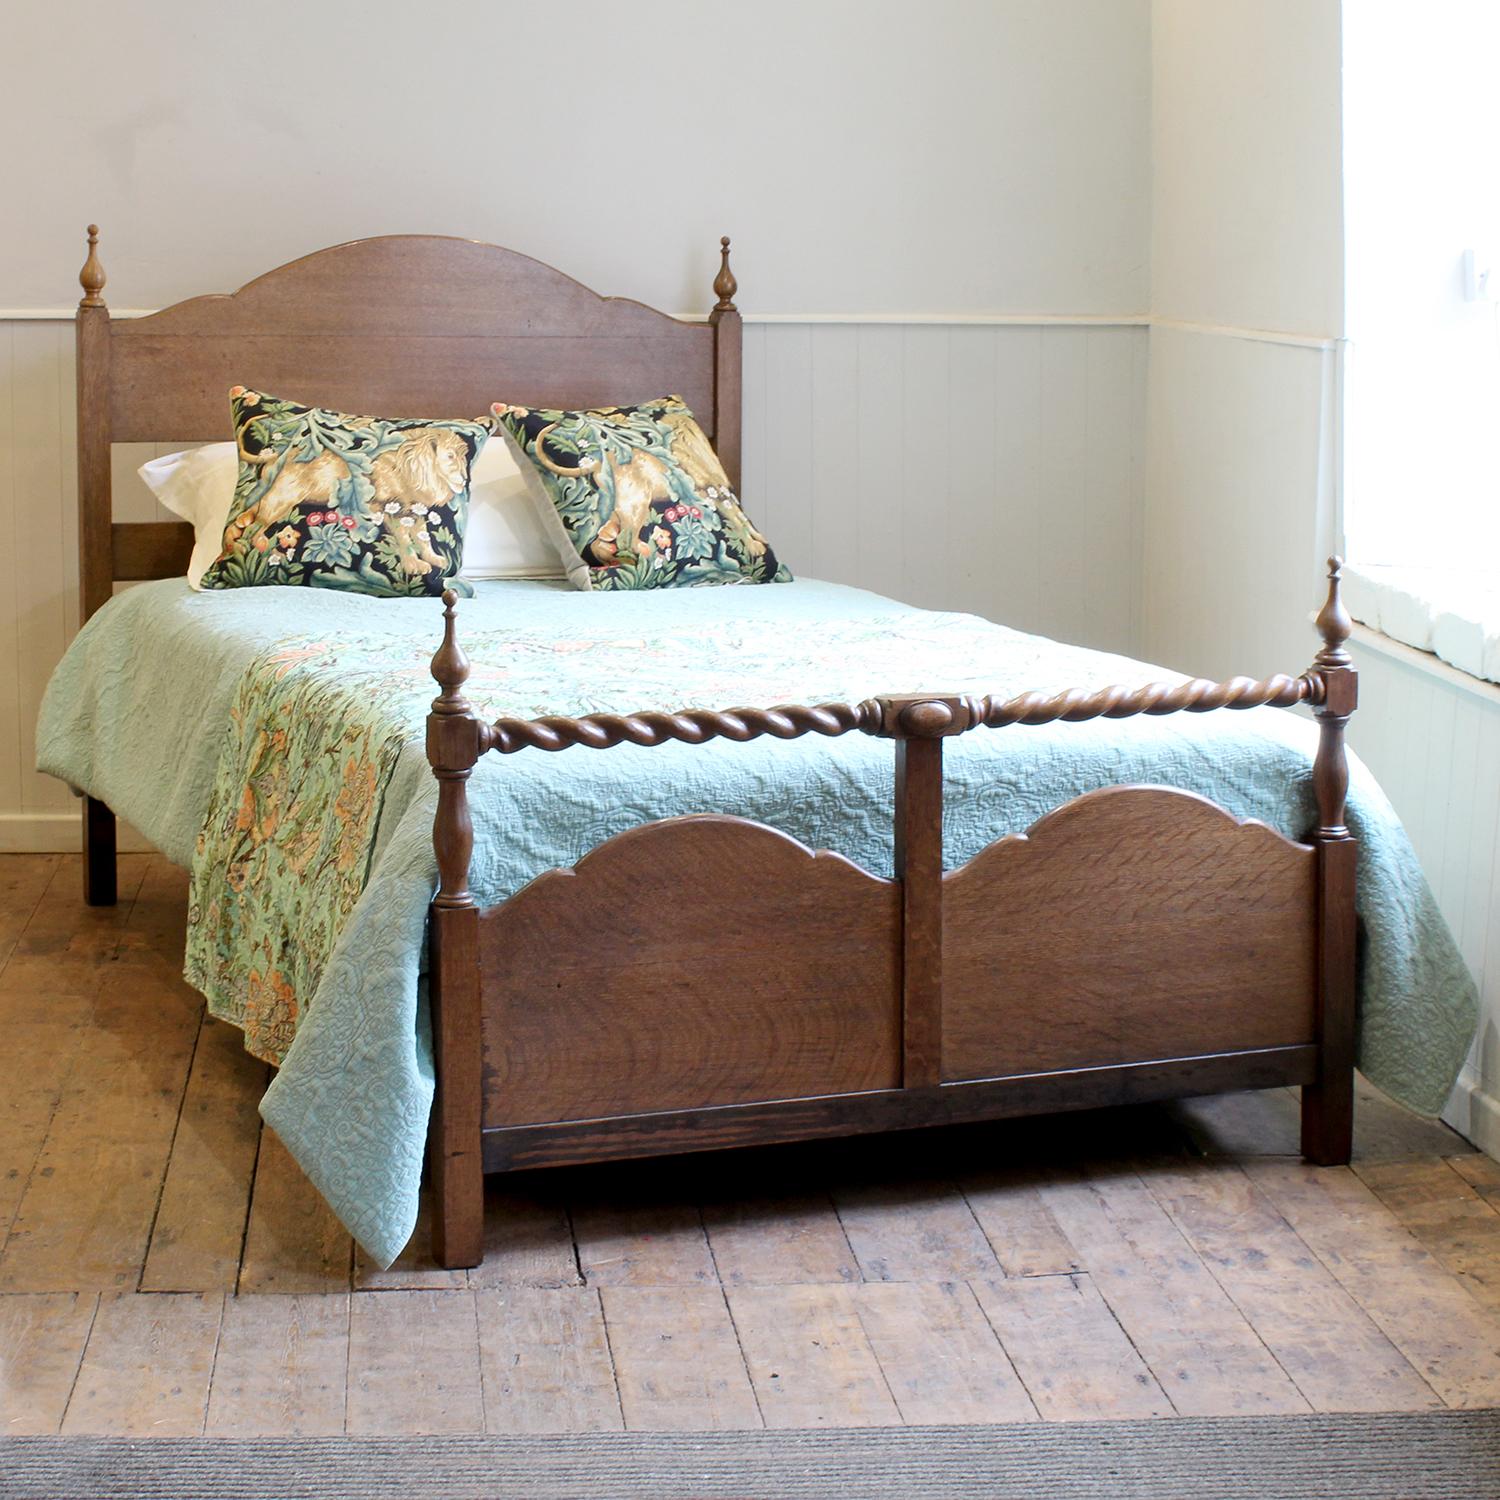 A small double bed in oak with barley twist posts and dleicate finials.

This bed accepts a small double, 4ft (48 in), base and mattress set.

The price is for the bed frame and a firm bed base. 

The mattress, sprung bed base, bedding and linen are